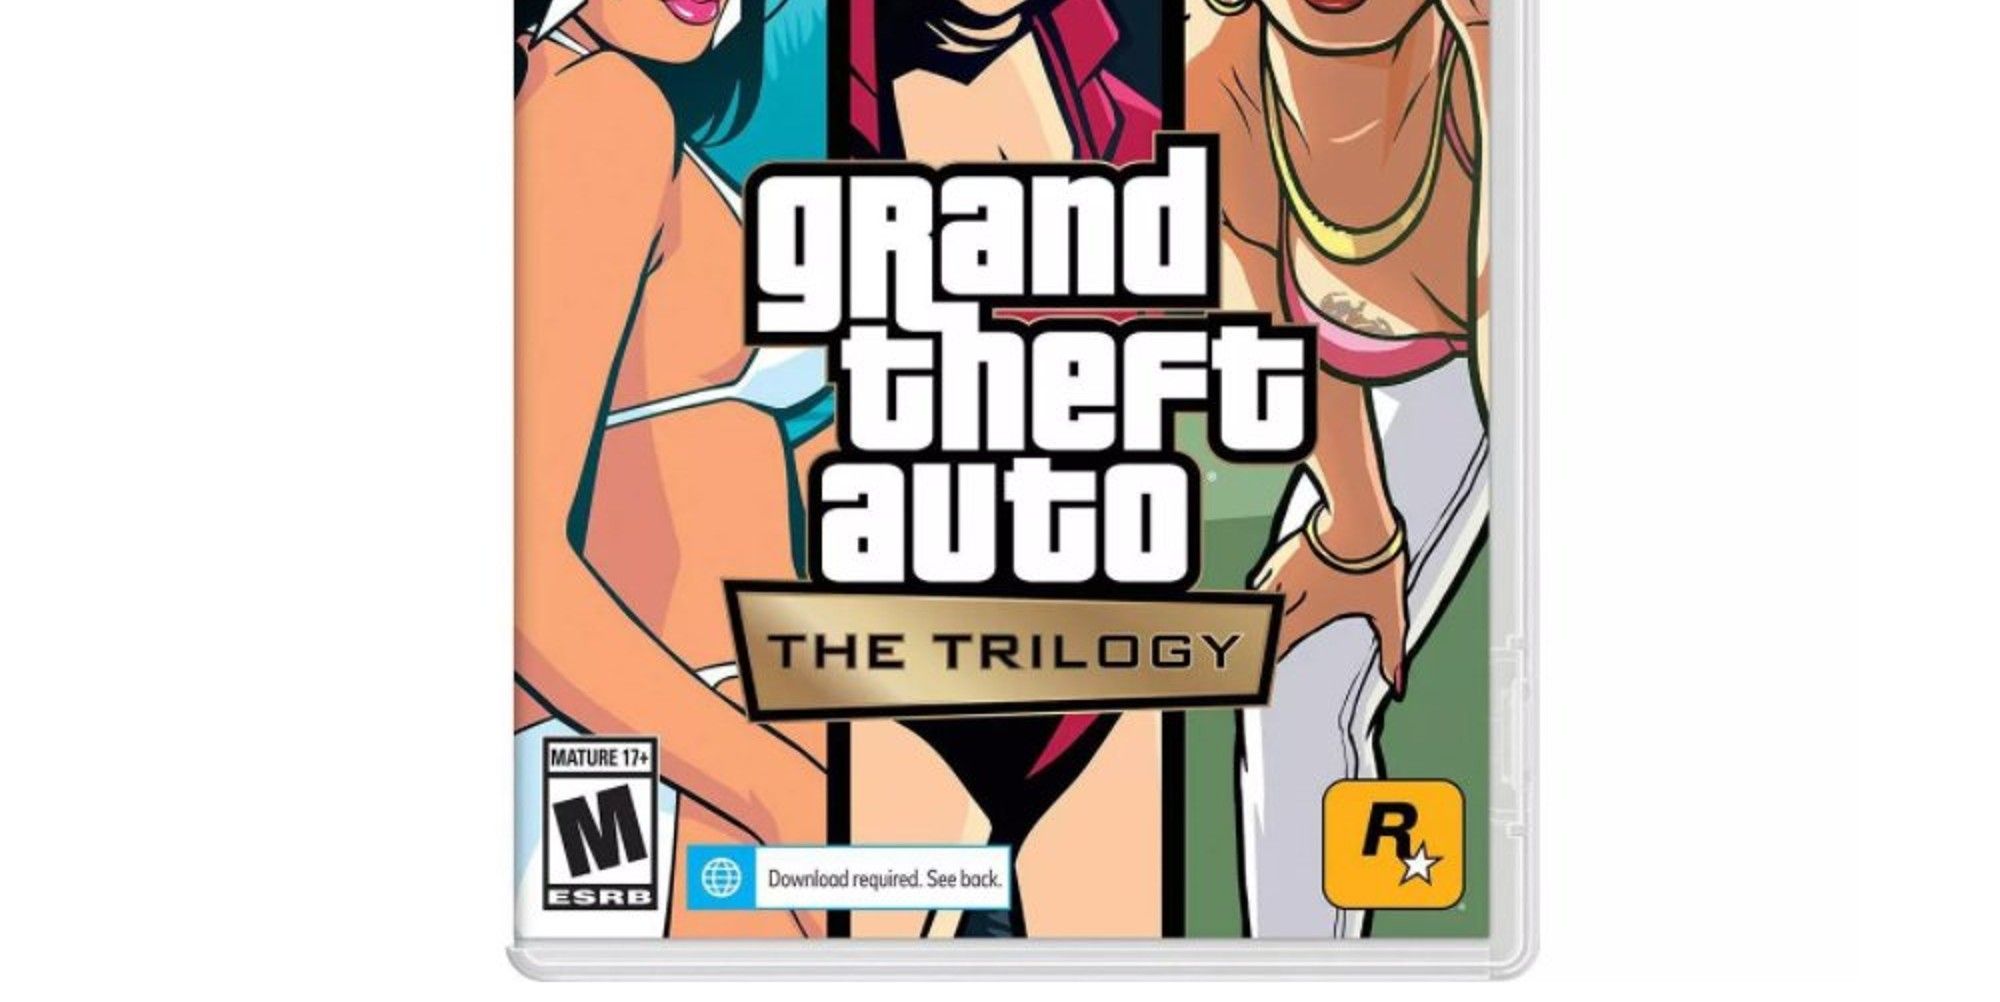 The physical version of GTA Trilogy on Switch needs a separate download